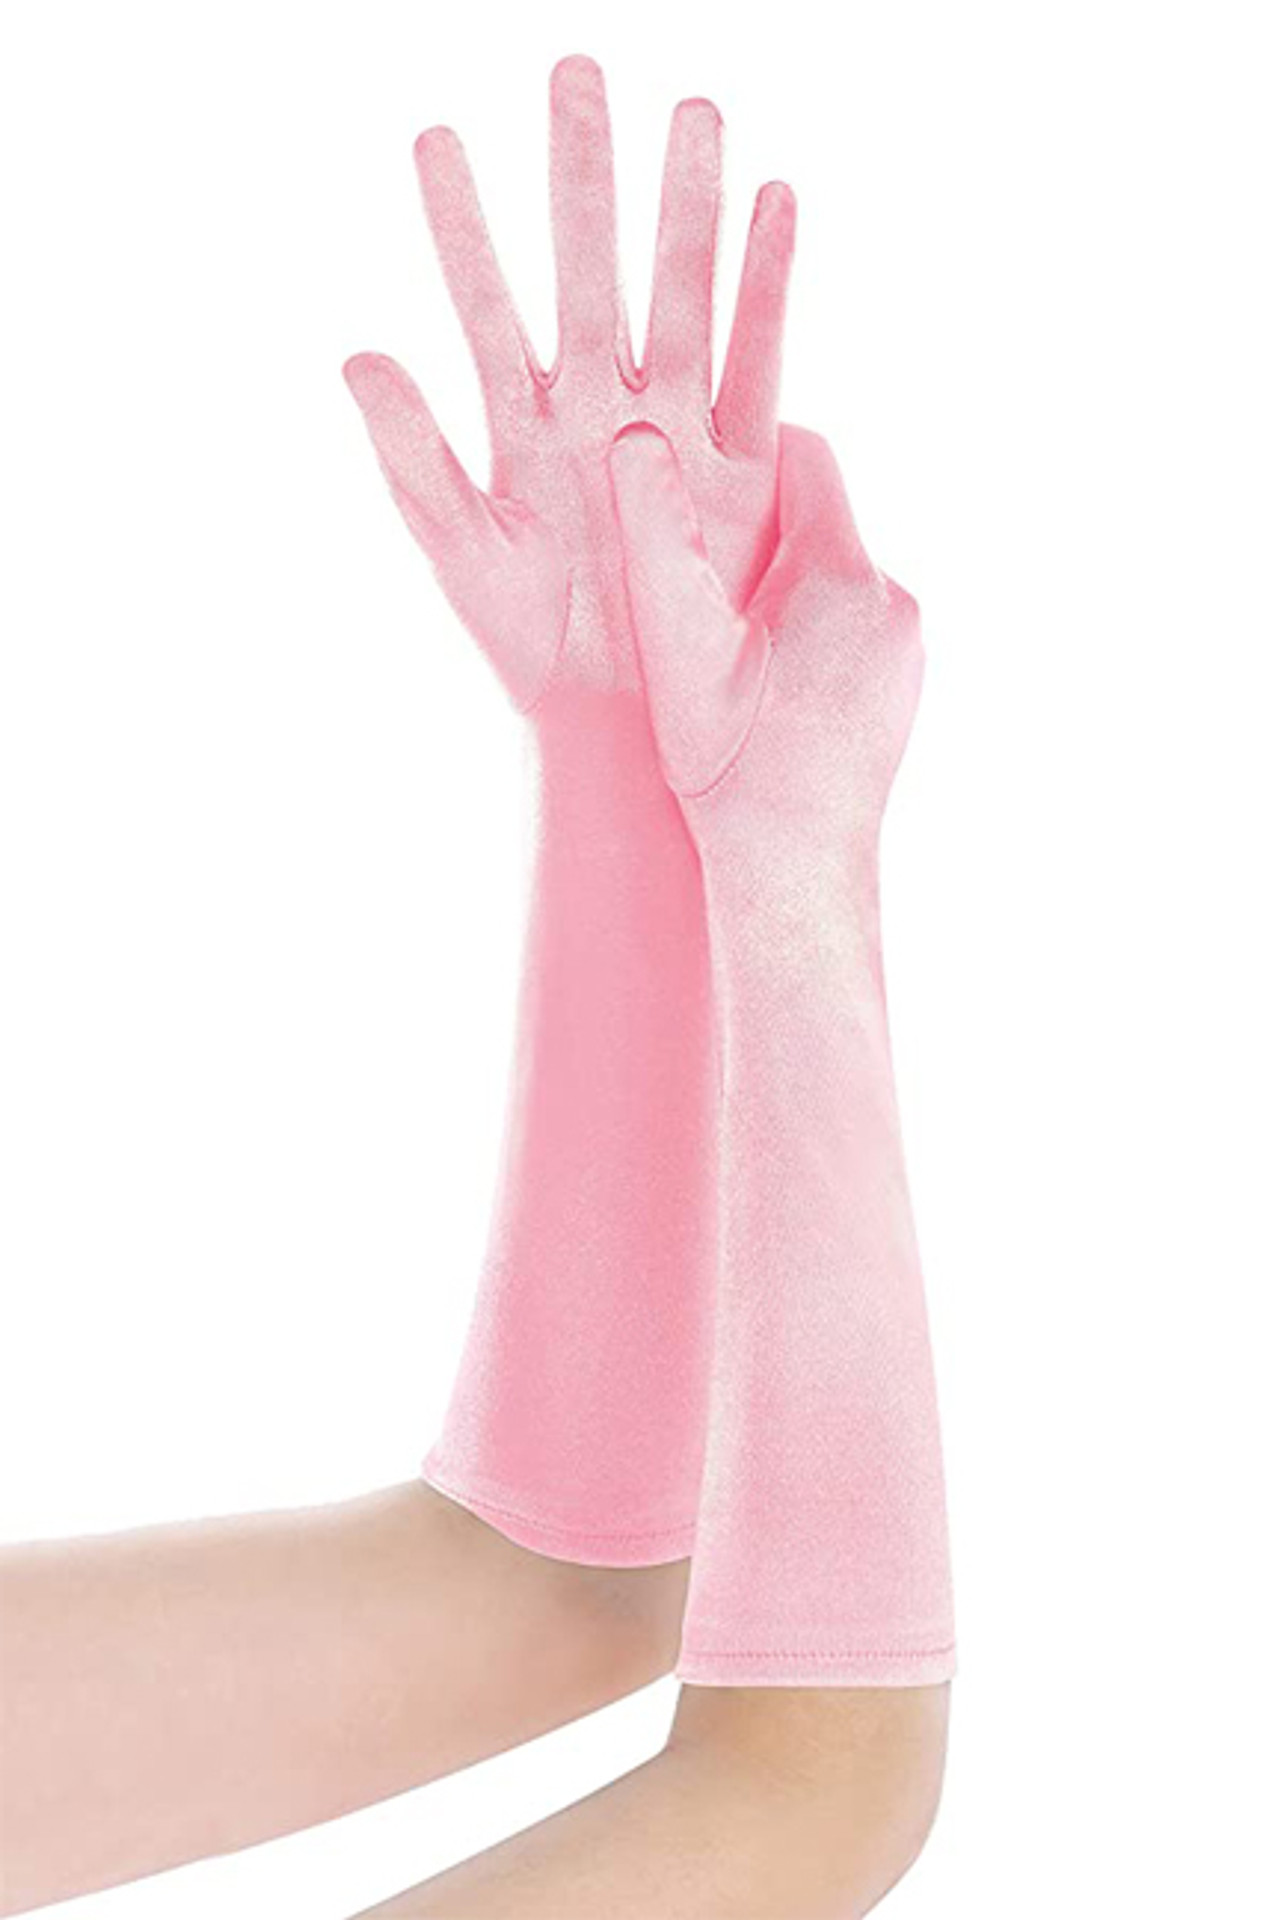 Pink Satin Opera Gloves 14 - Buy Costume Accessories at Lucky Doll